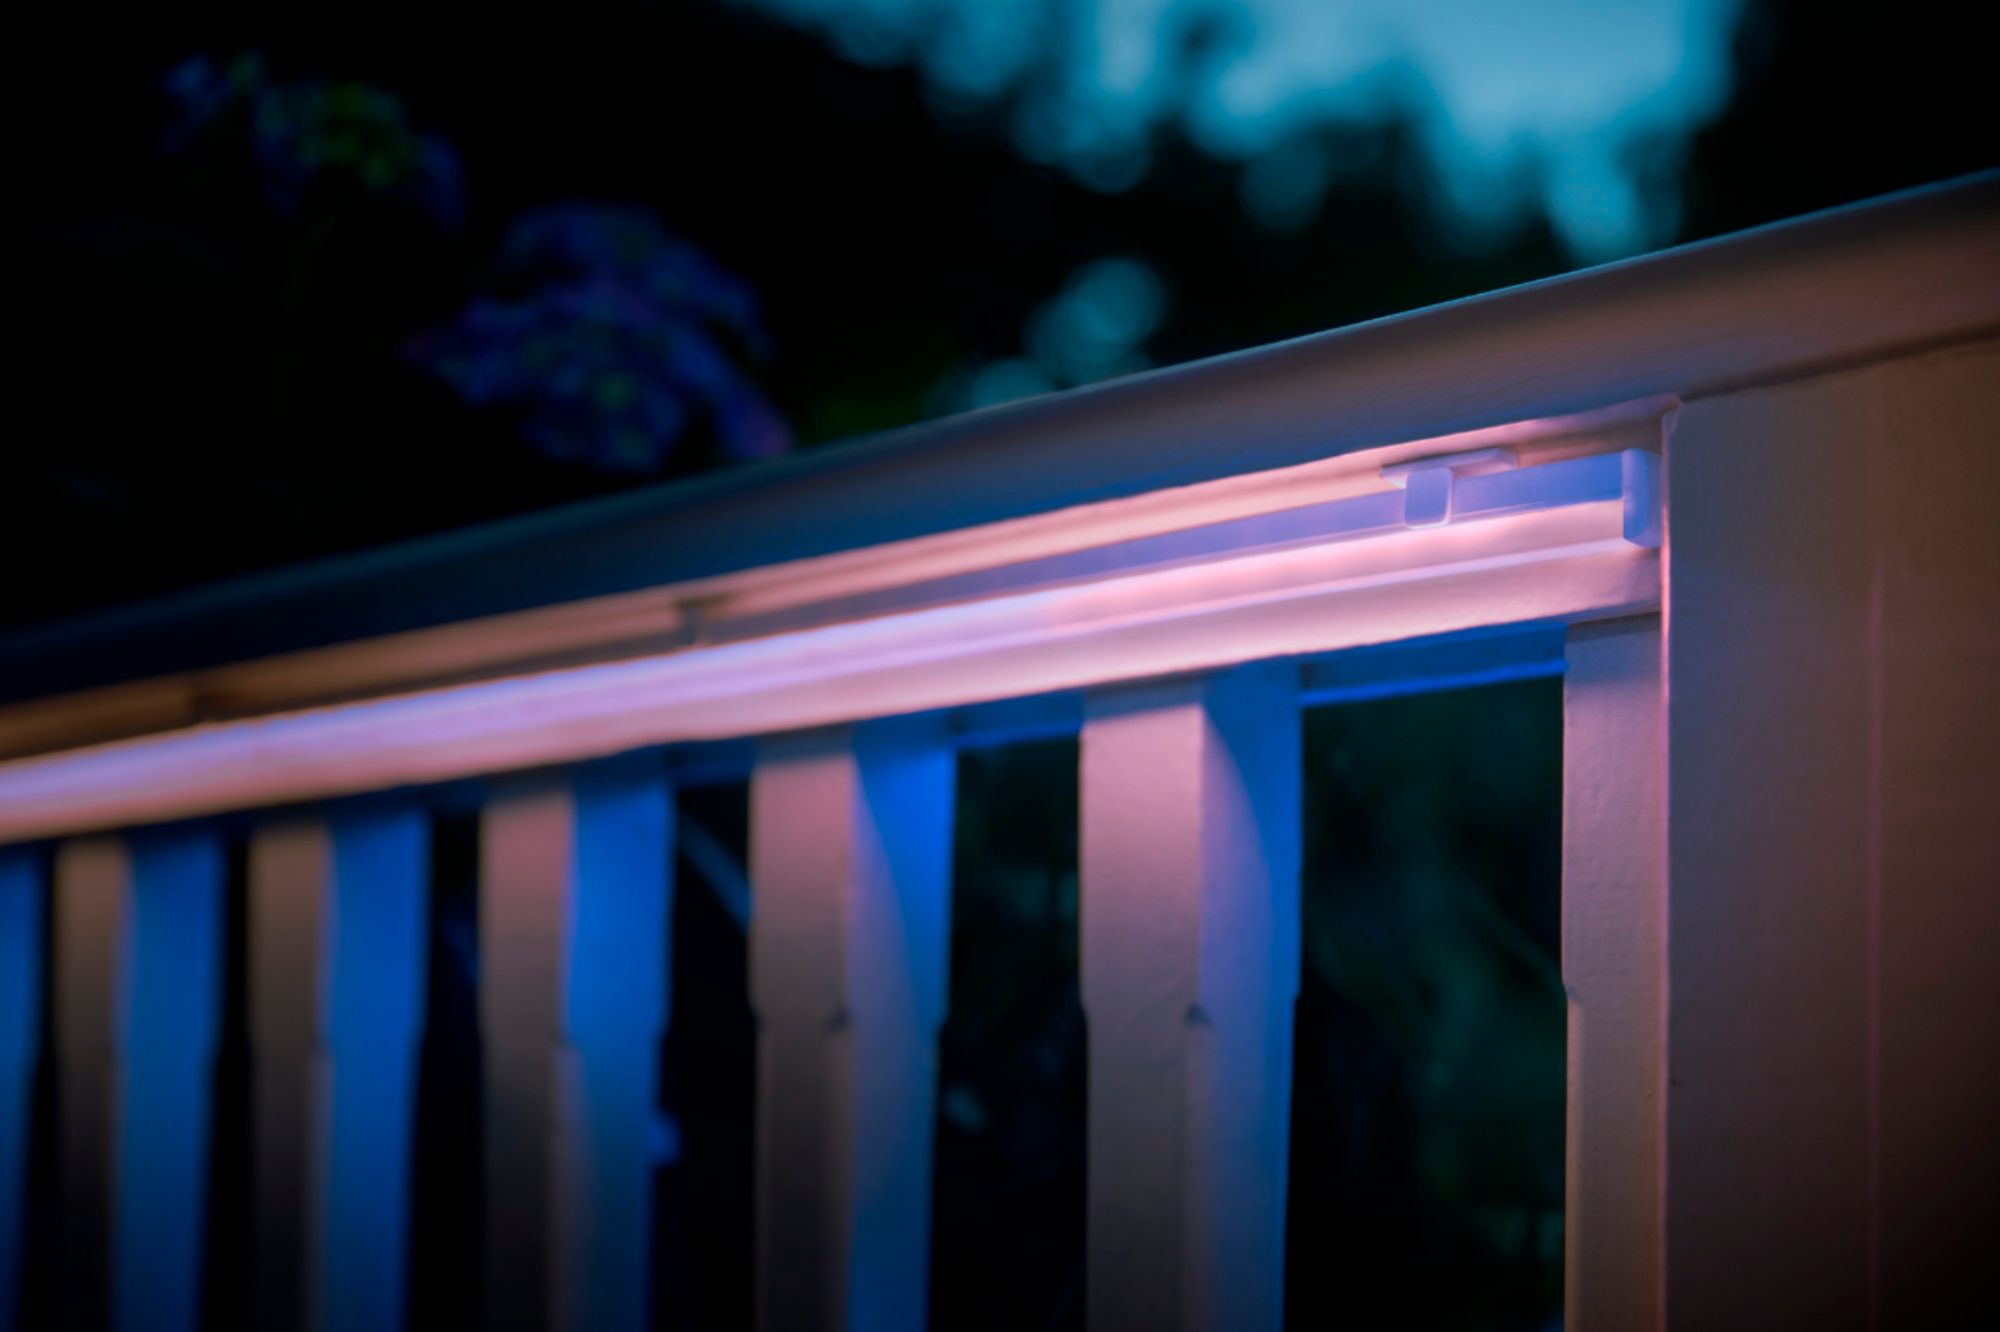 Hue Outdoor Lightstrip 5m White/Color Amb. - Philips Hue